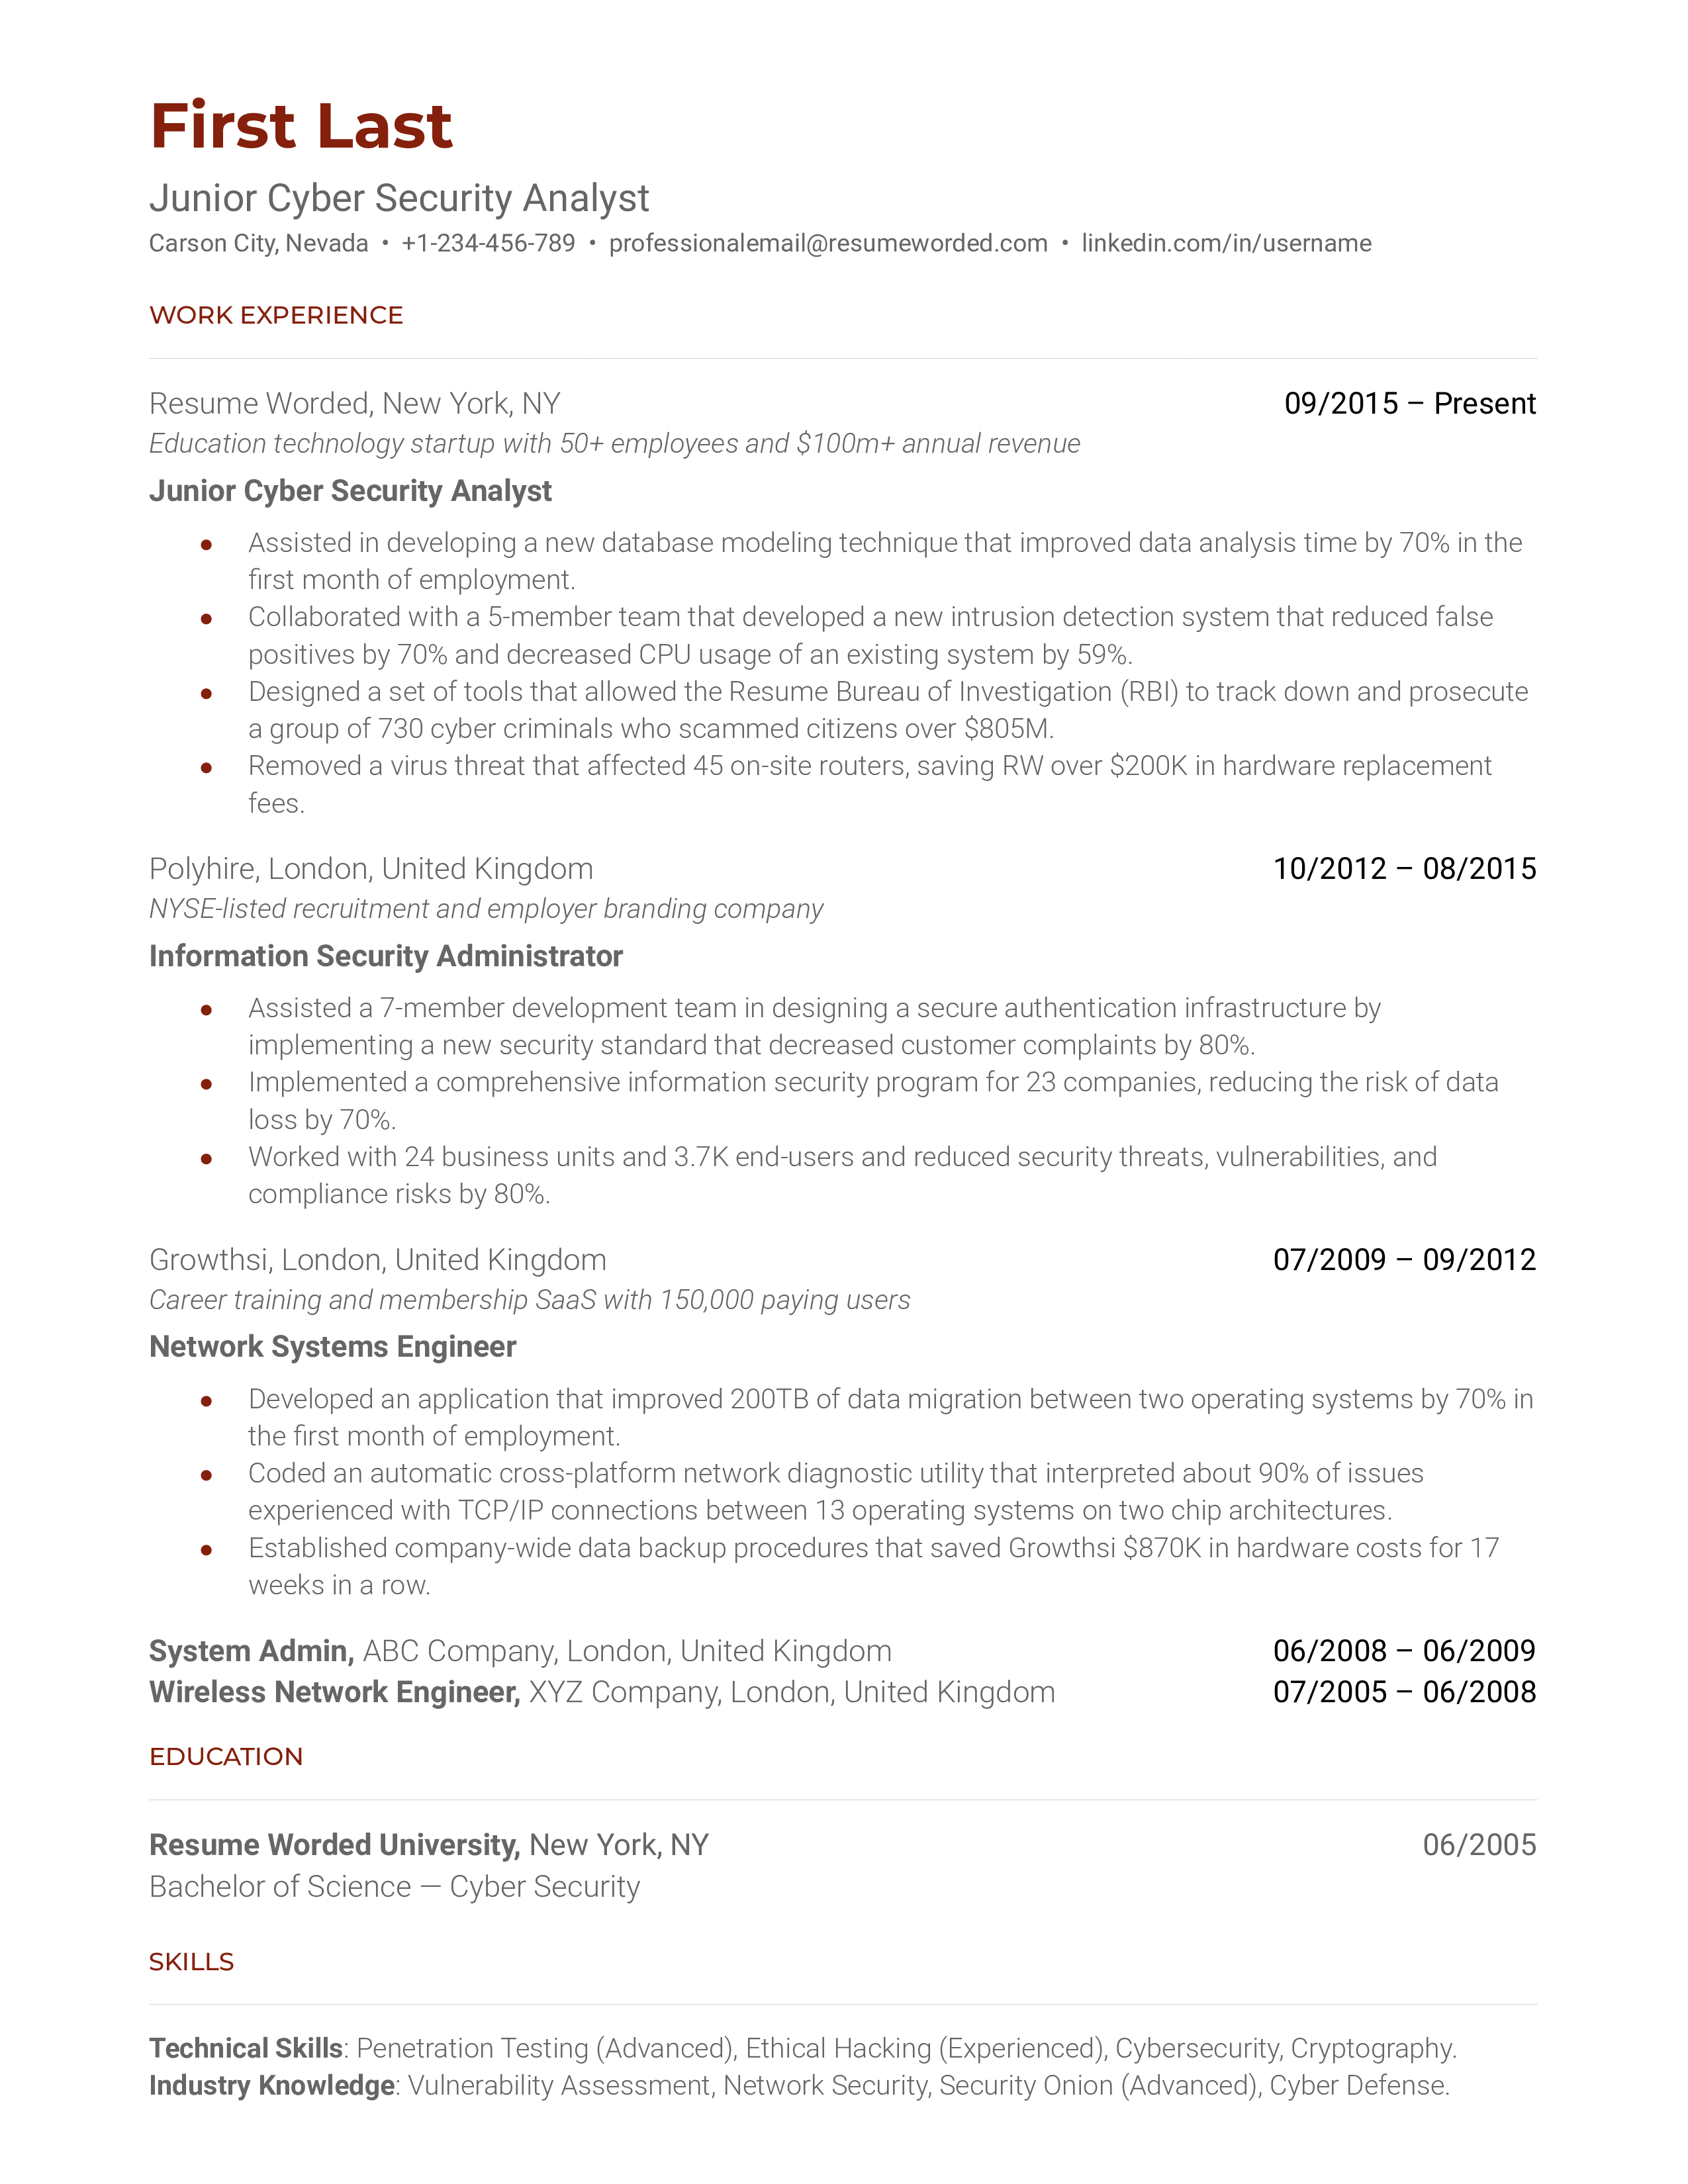 A junior cyber security analyst resume that features past experience in information security admin and systems engineering.